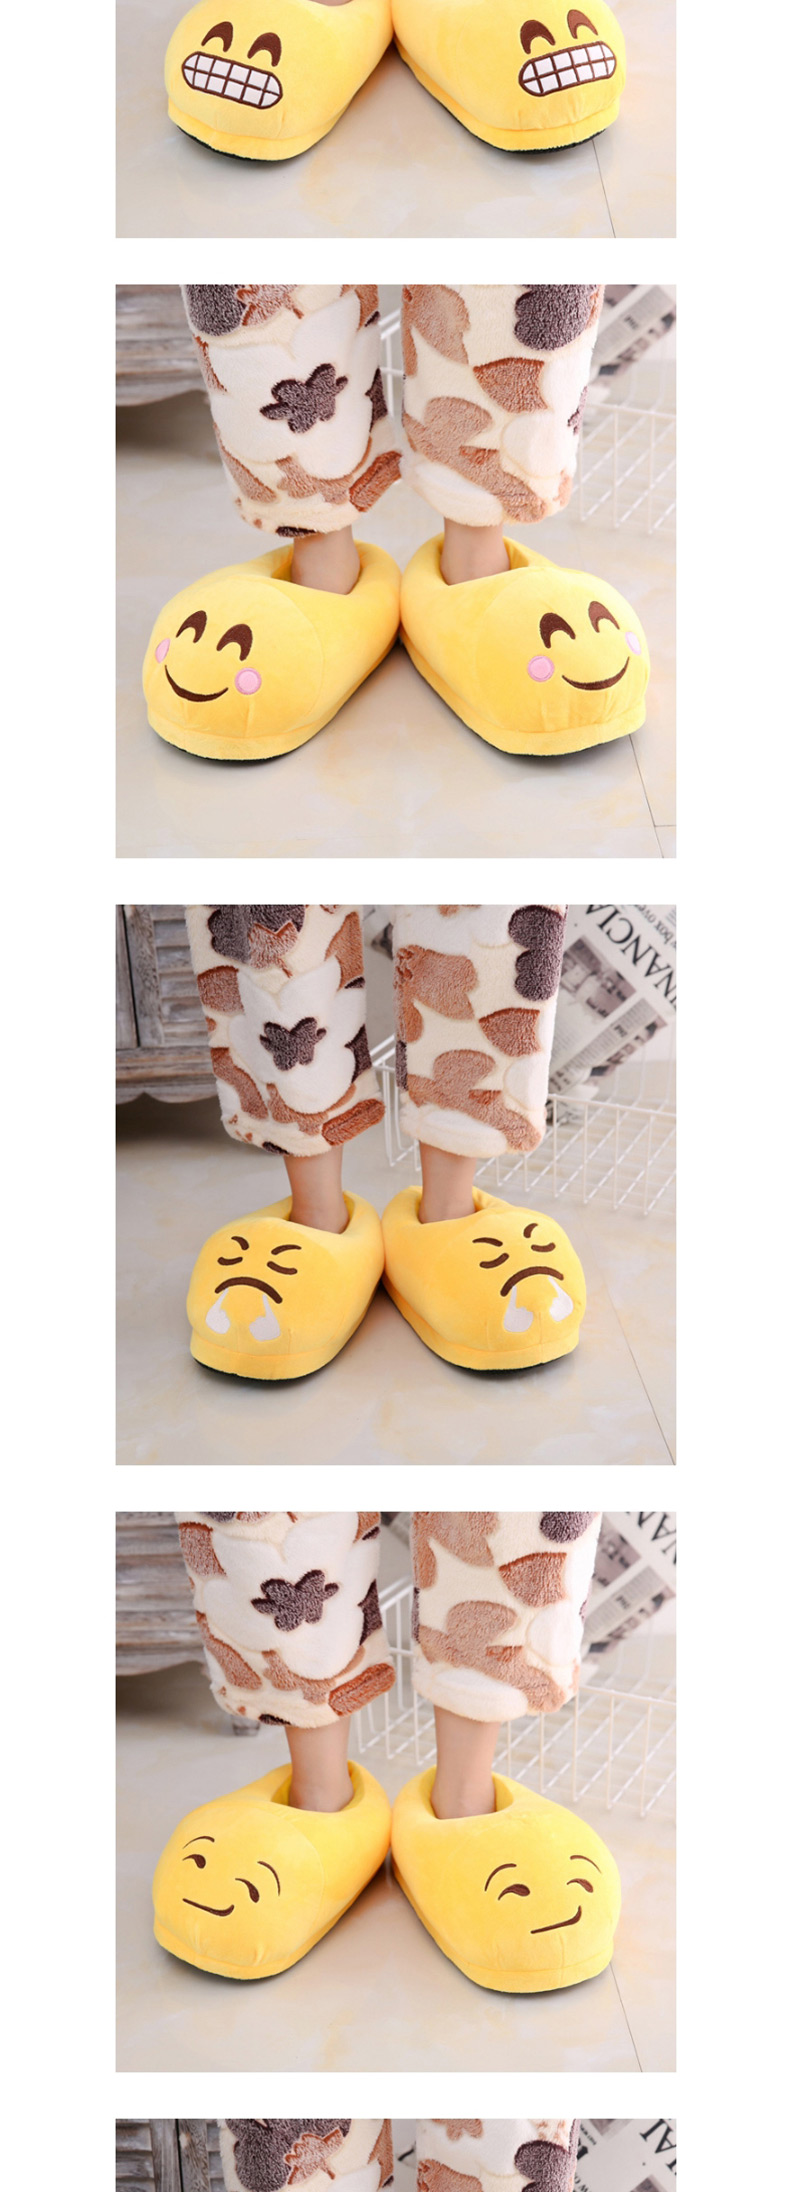 Fashion 6 Yellow Smiley Face Cartoon Expression Plush Bag With Cotton Slippers,Slippers